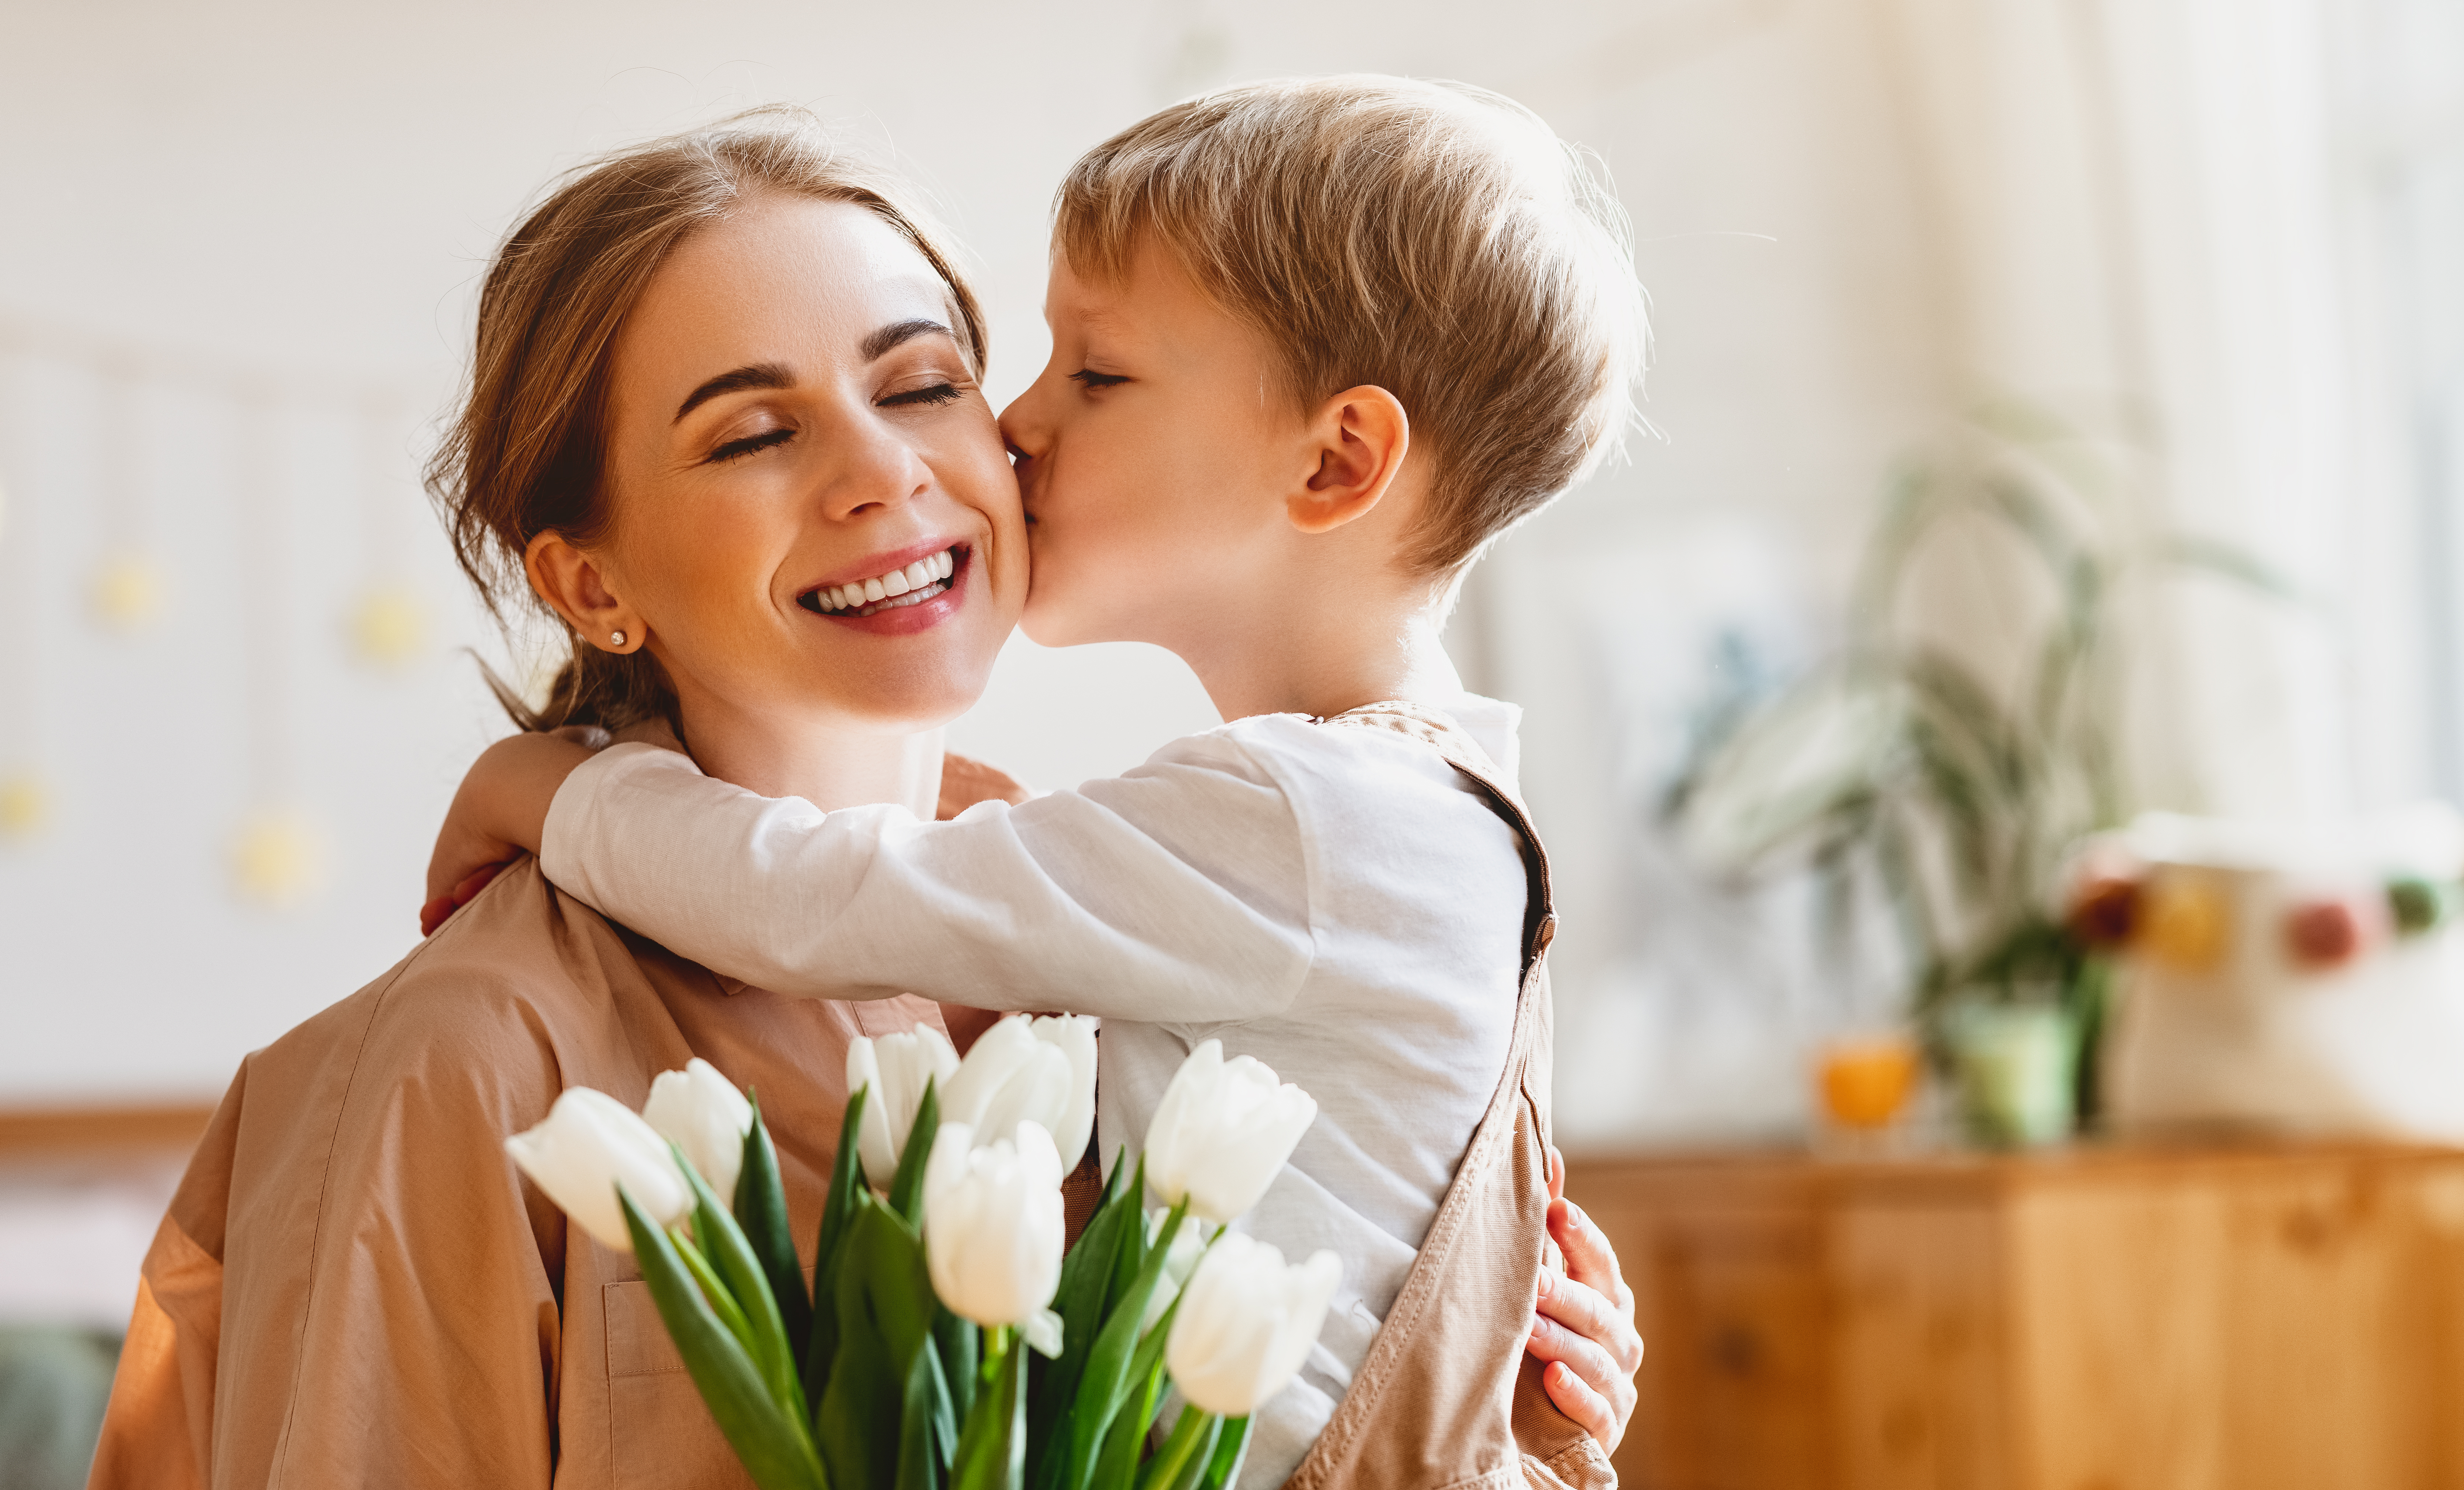 Little boy kissing his mom and giving her flowers | Source: Shutterstock